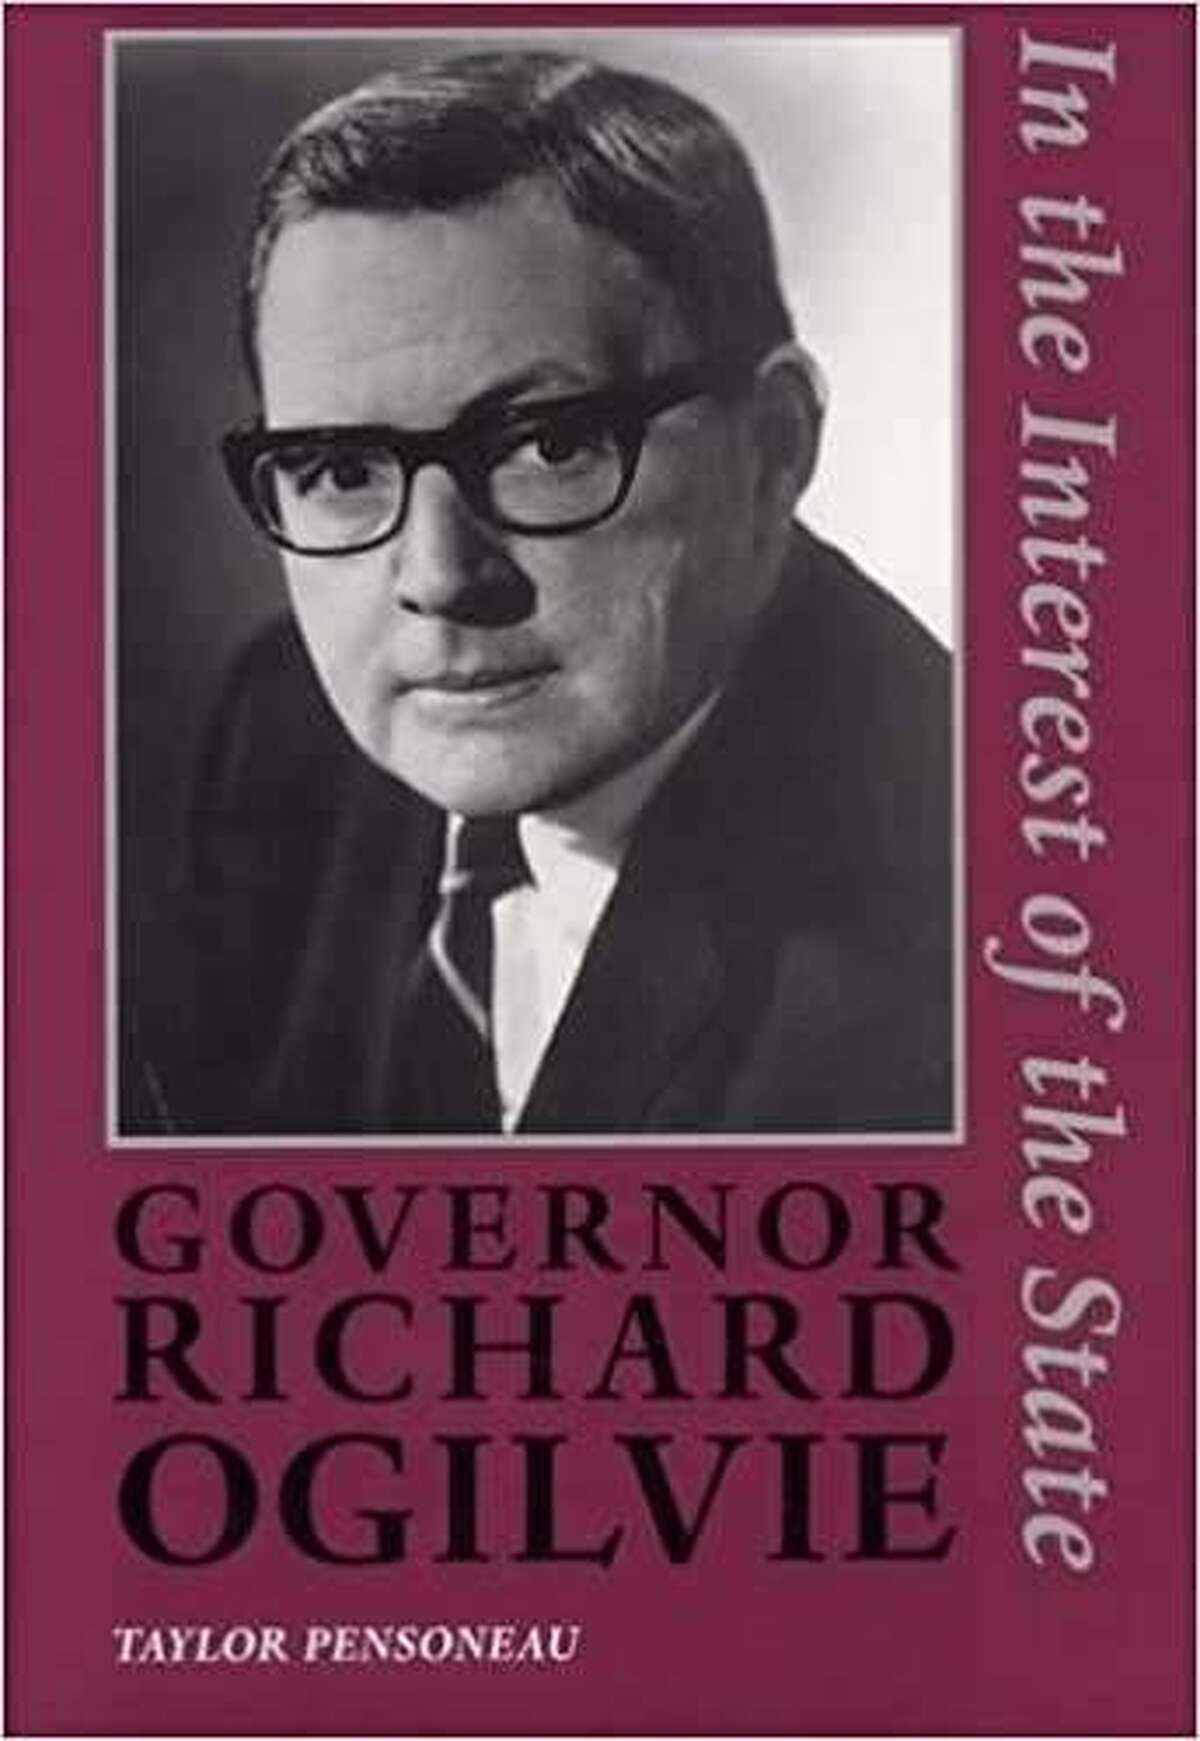 “Governor Richard Ogilvie: In the Interest of the State,” by Taylor Pensoneau, 1997